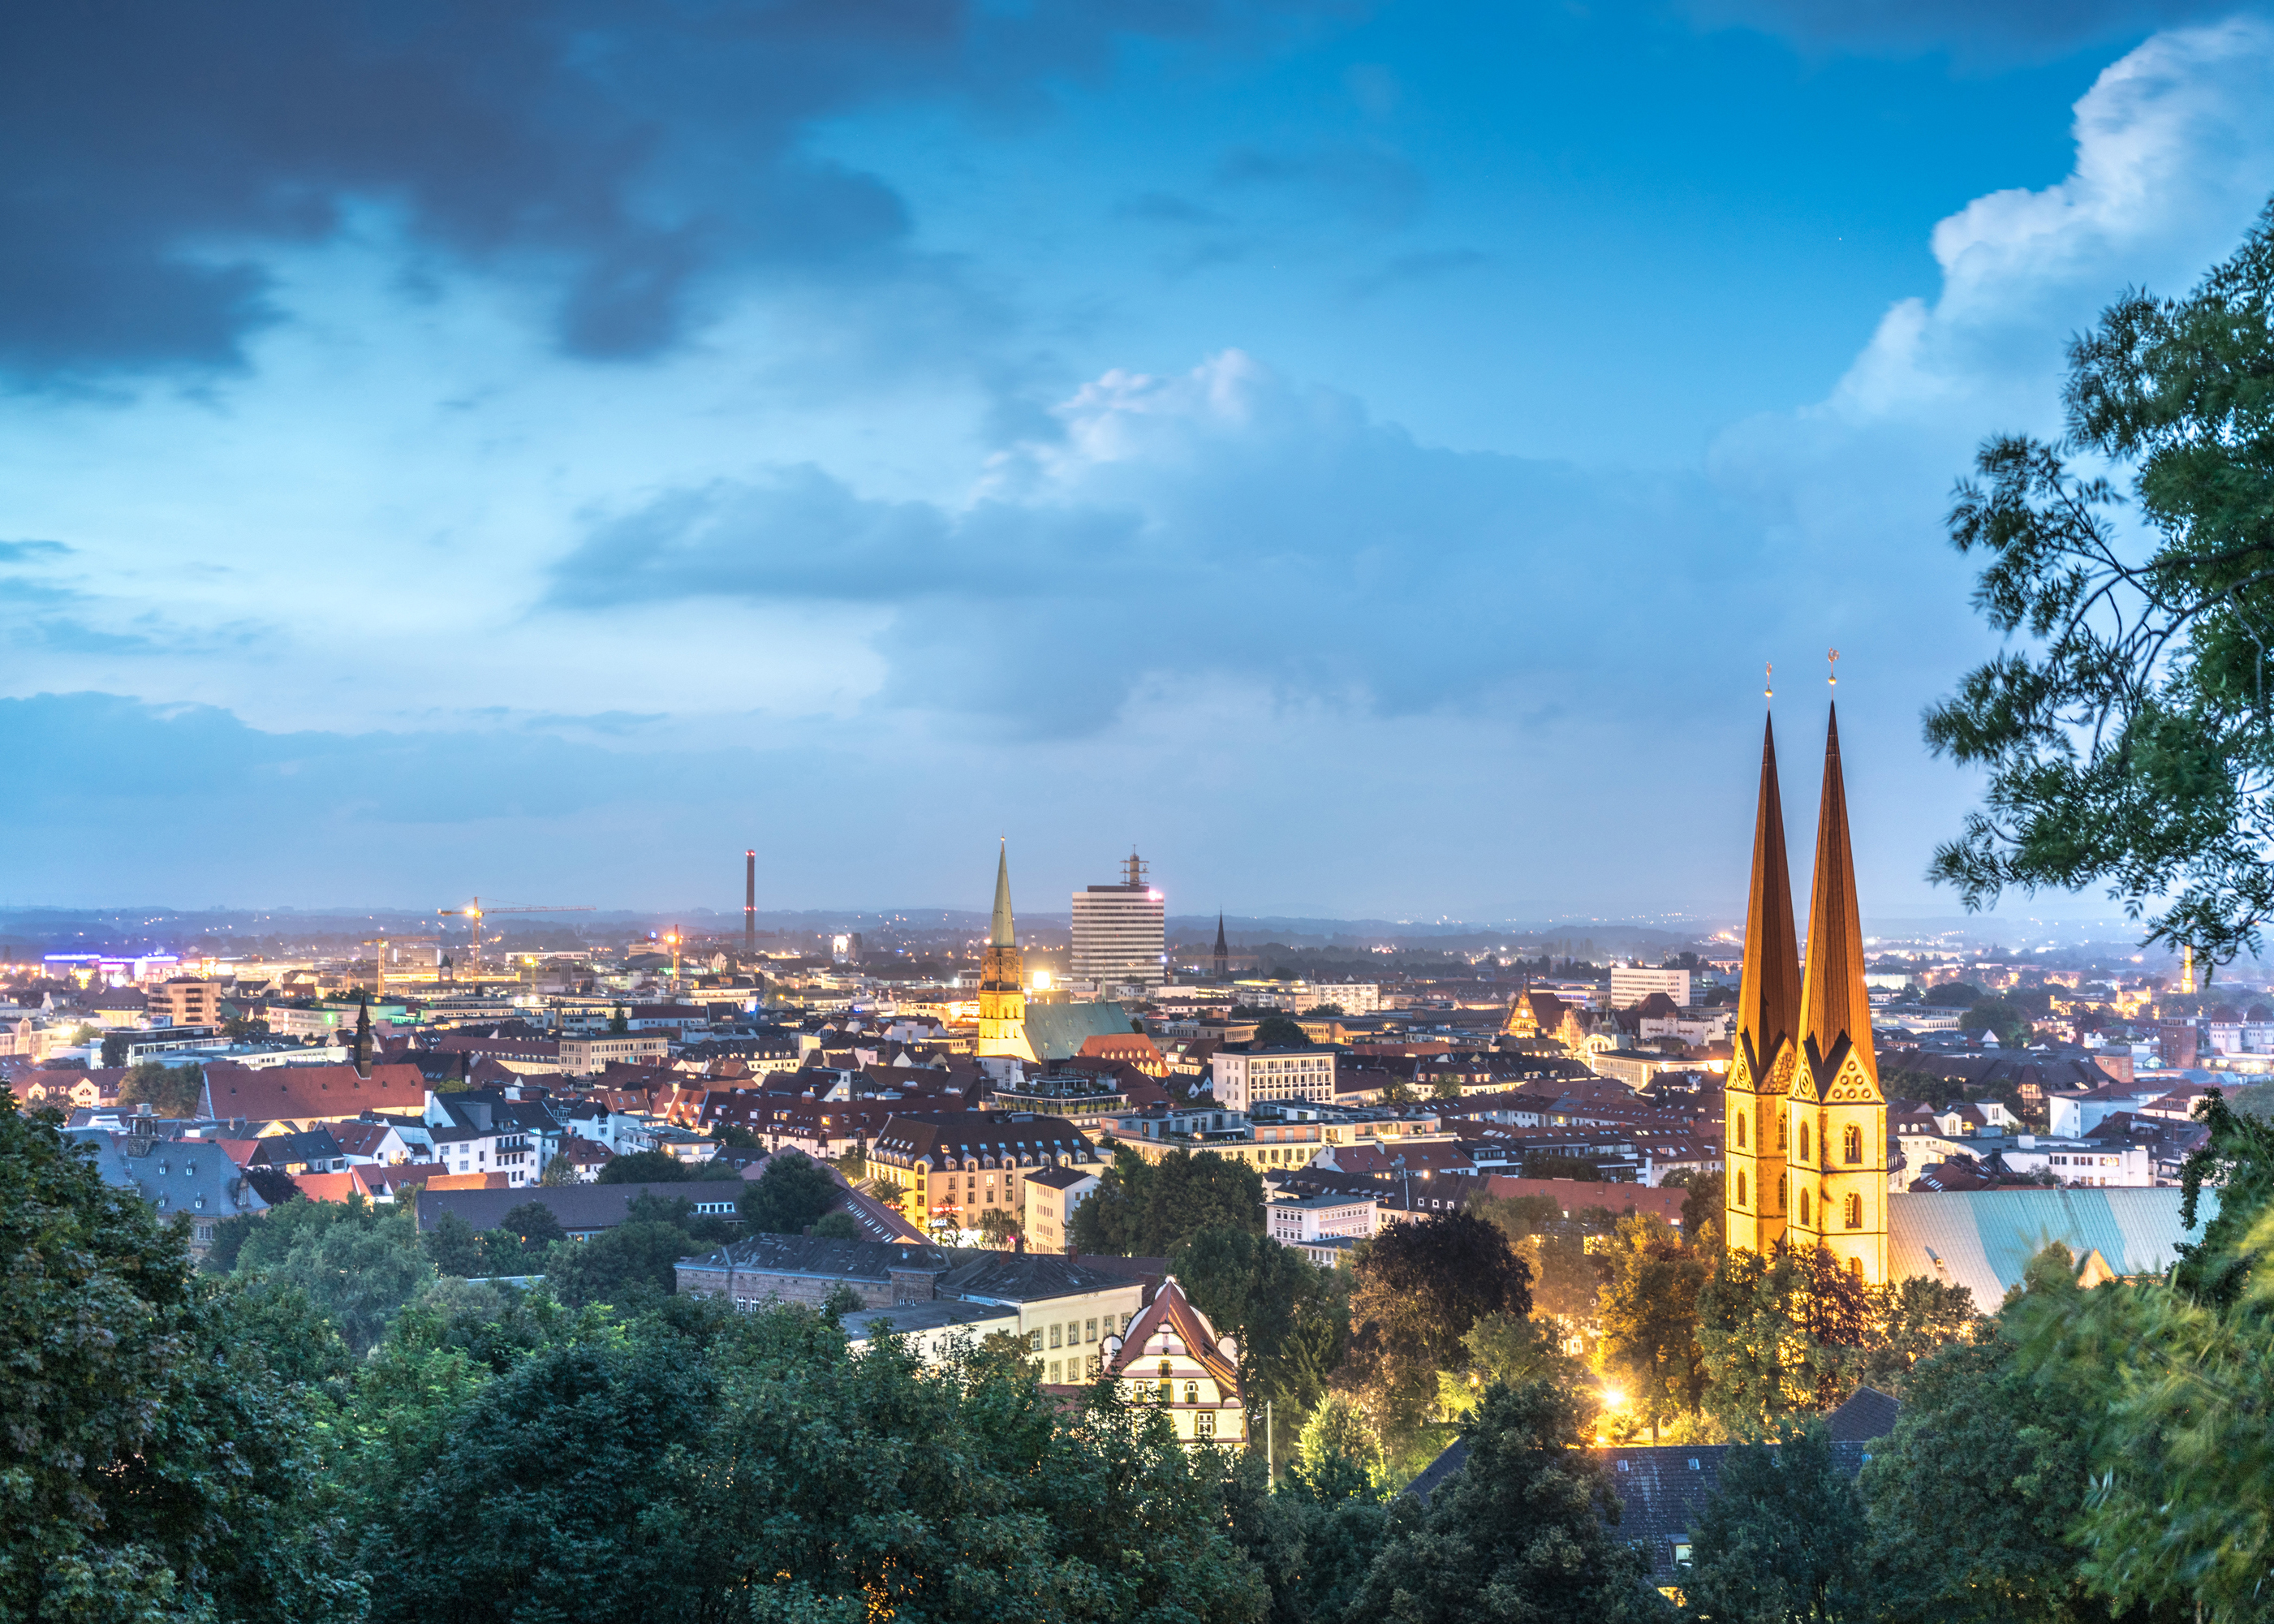 View on the City of Bielefeld at night